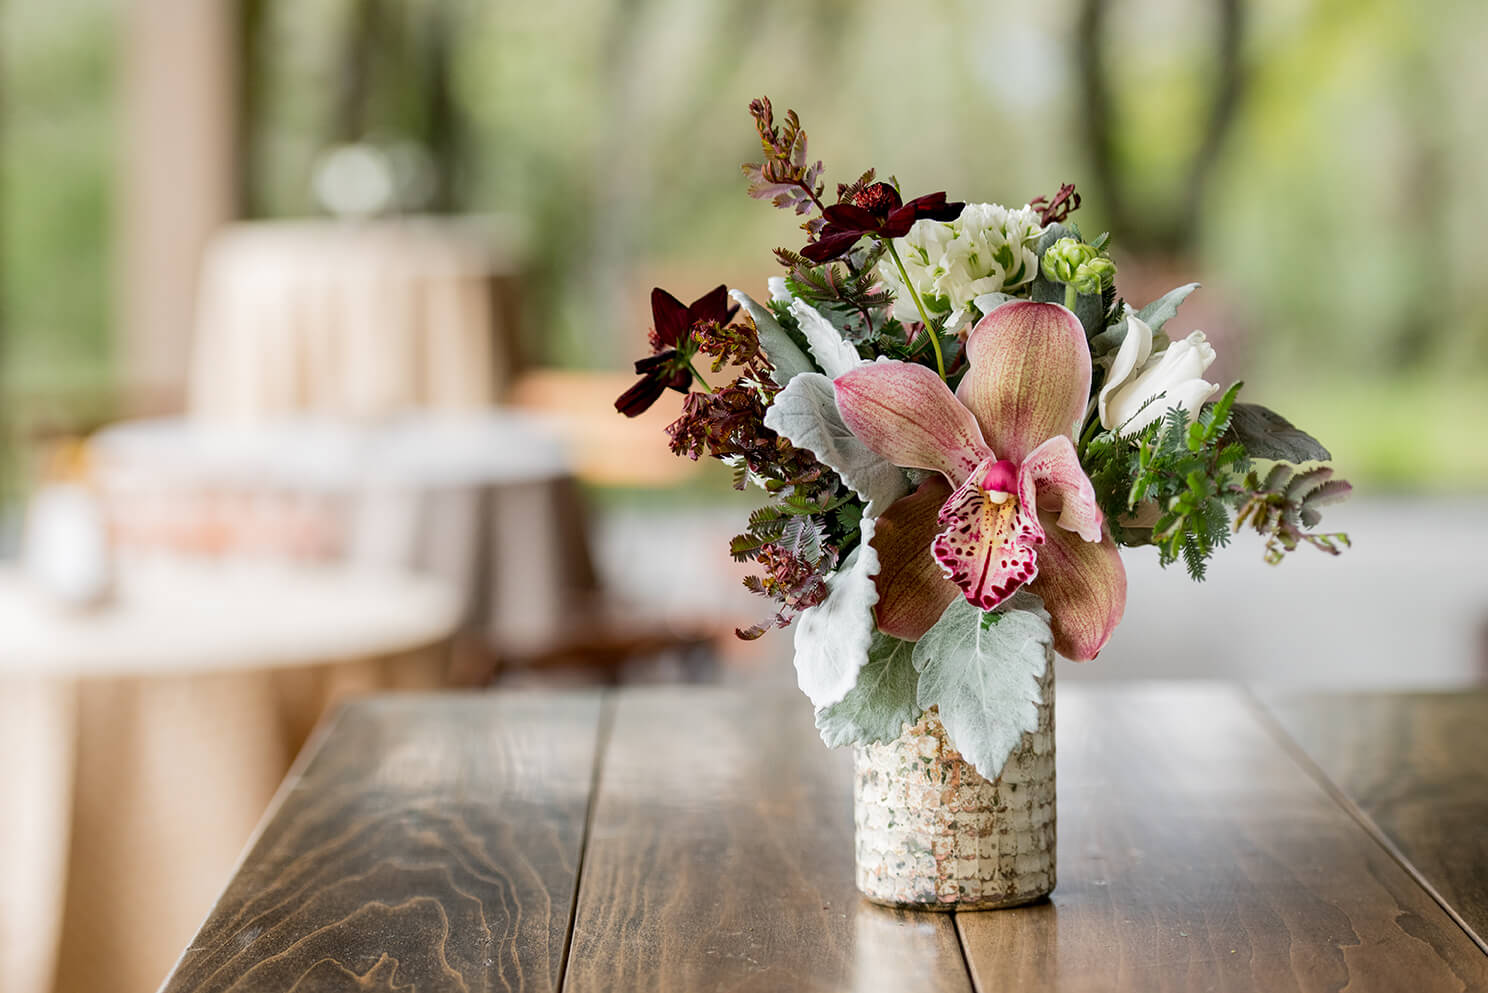 Rustic floral arrangement on wooden table in outdoor winery venue